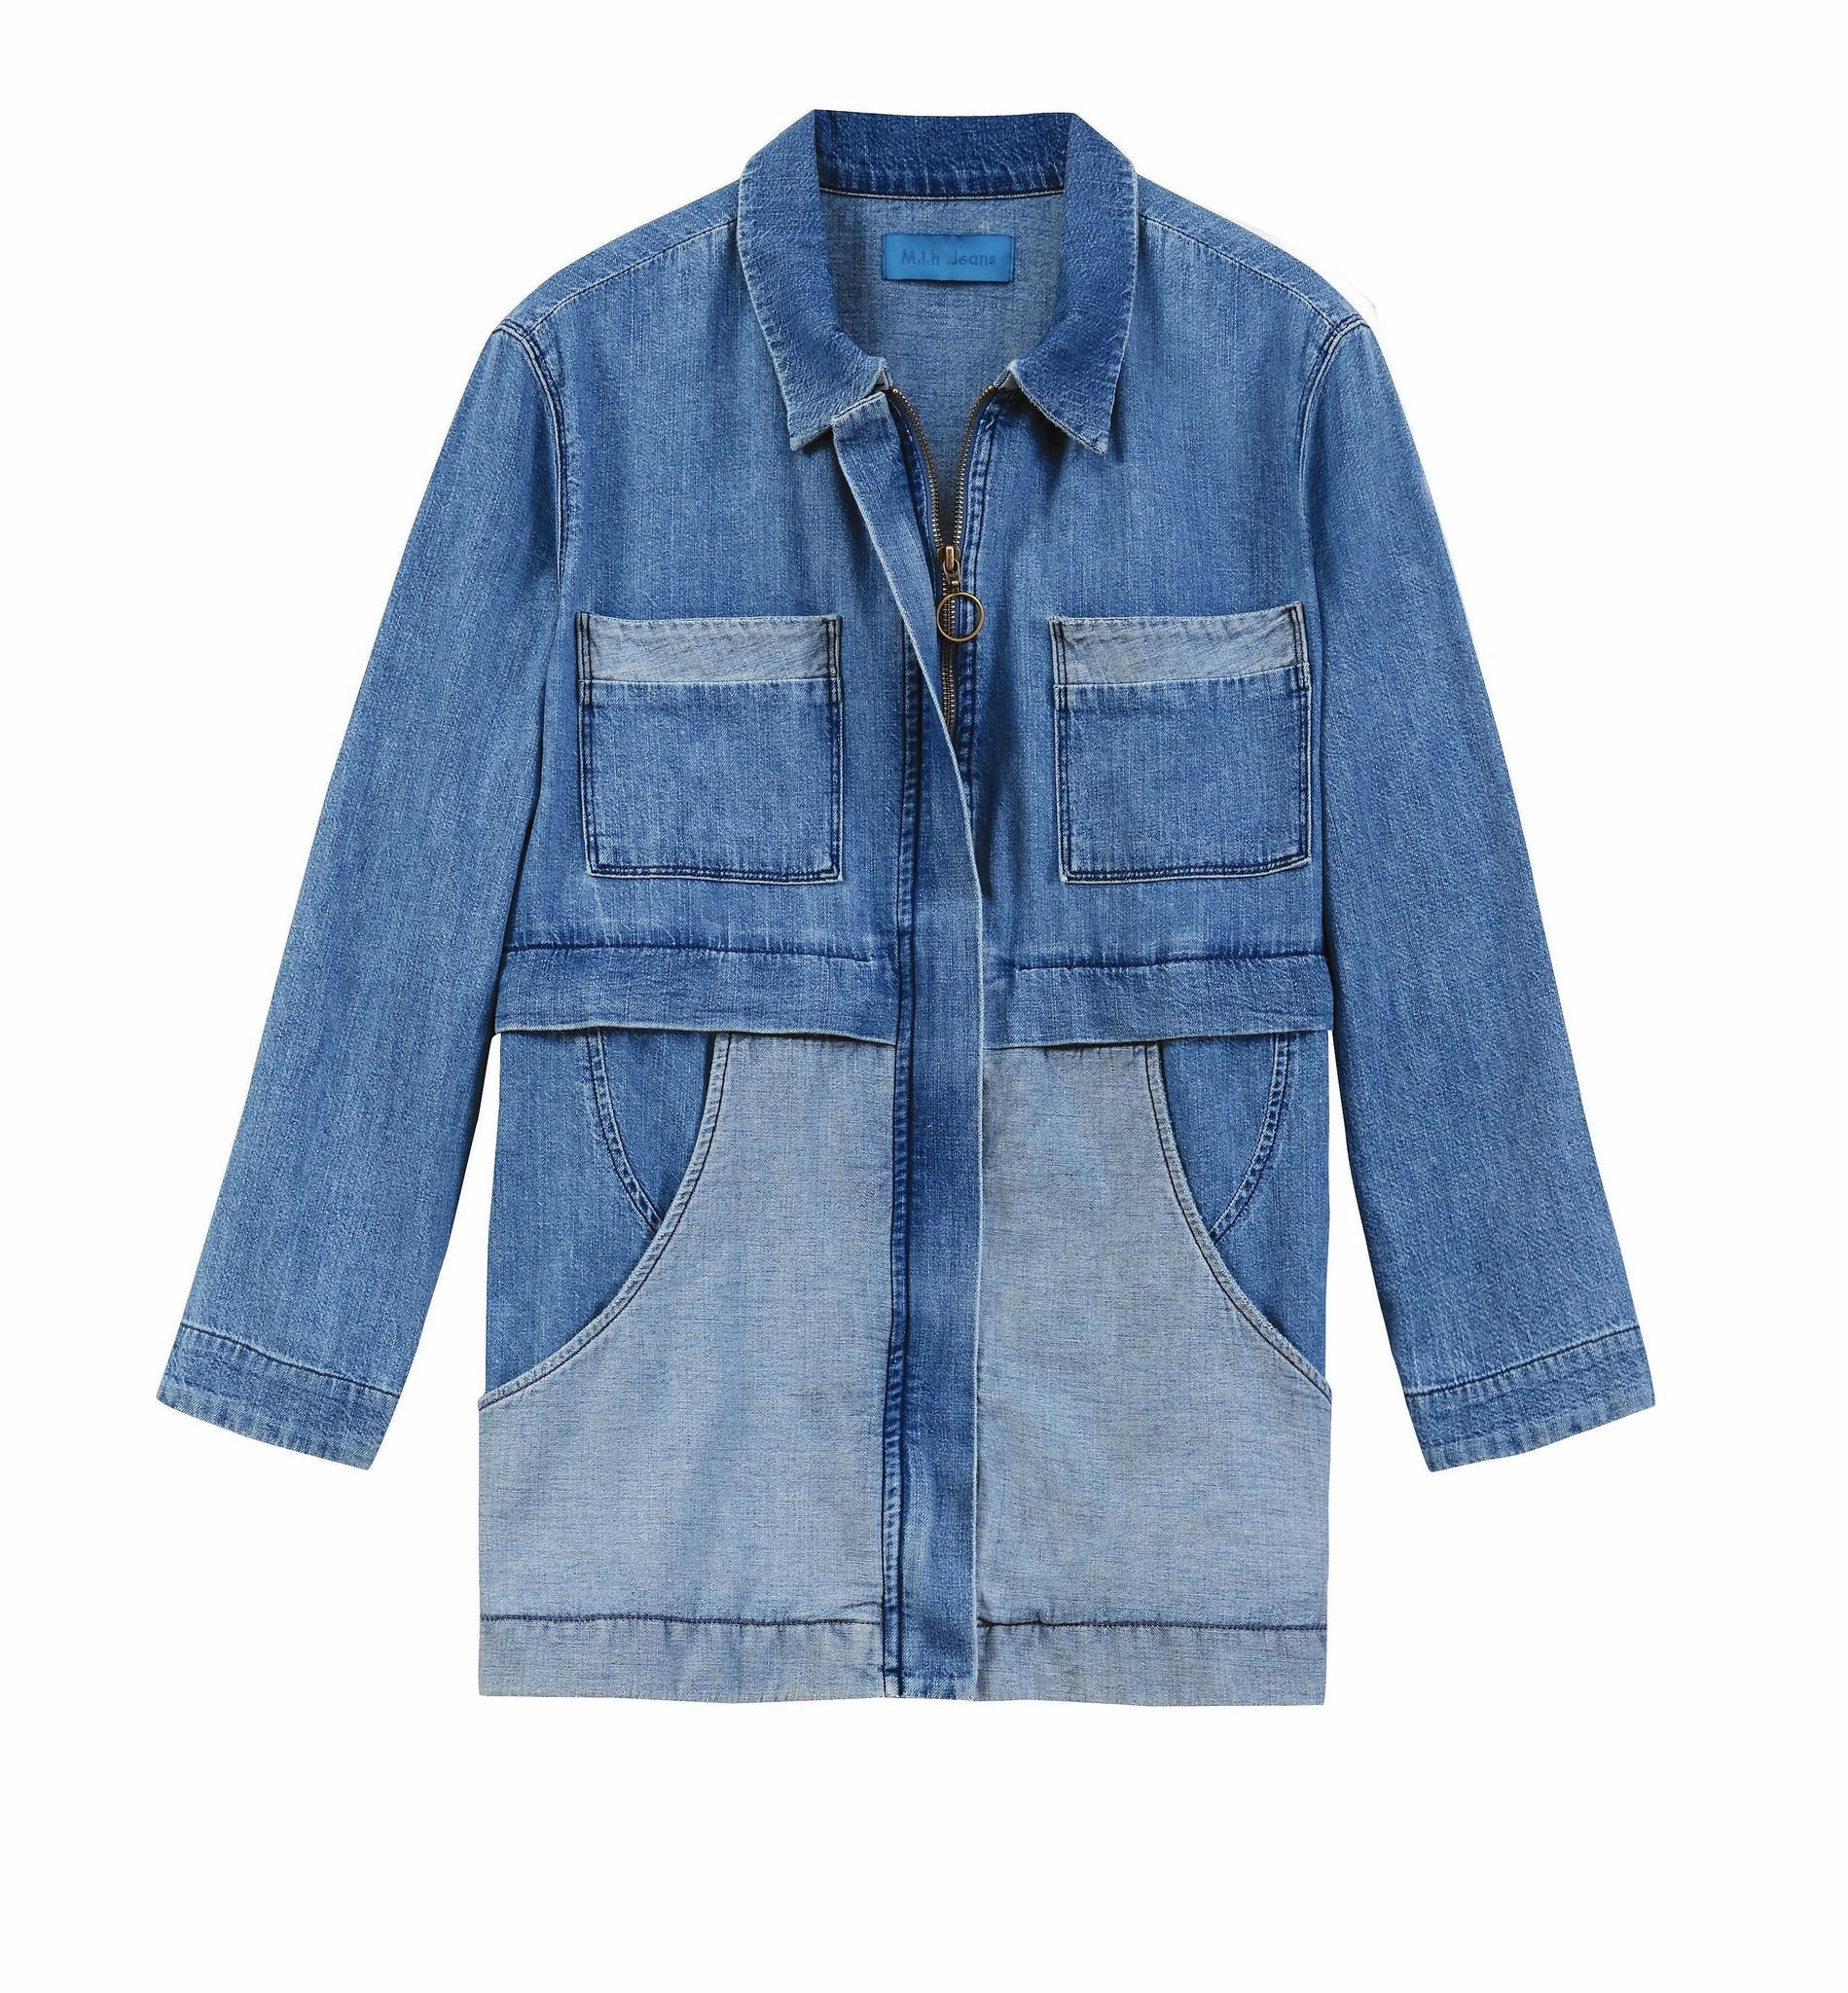 Denim jackets transcend trends and help you express your personal style ...